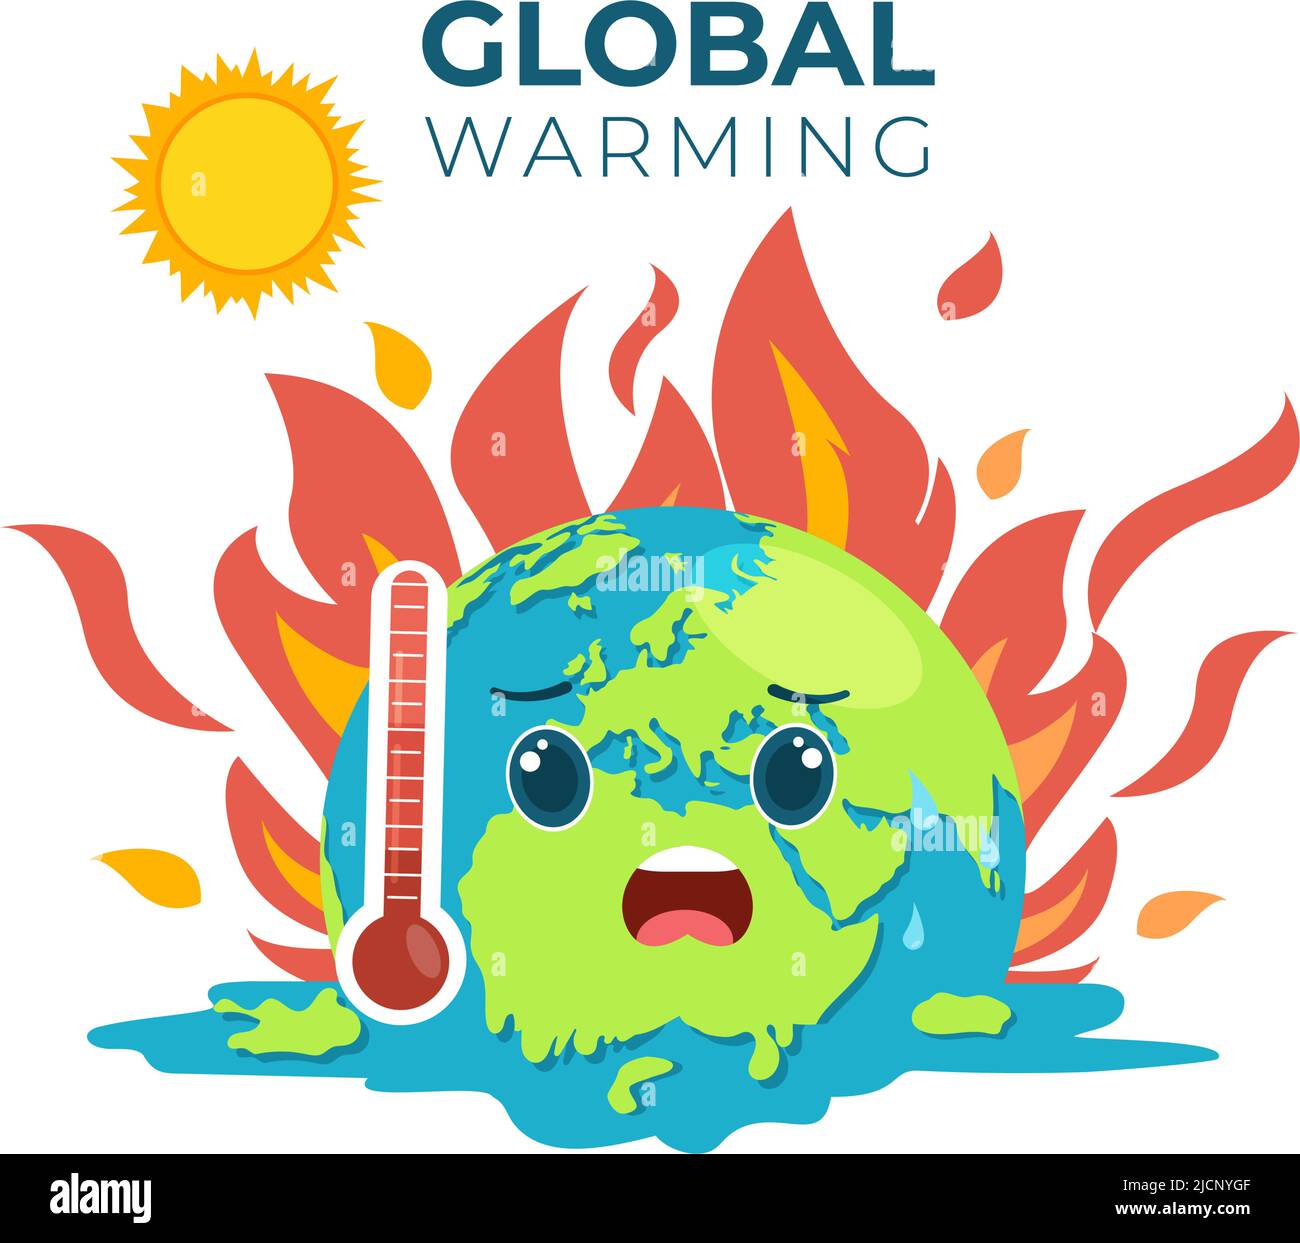 Global Warming Cartoon Style Illustration with Planet Earth in a Melting or Burning State and Image Sun to Prevent Damage to Nature and Climate Change Stock Vector